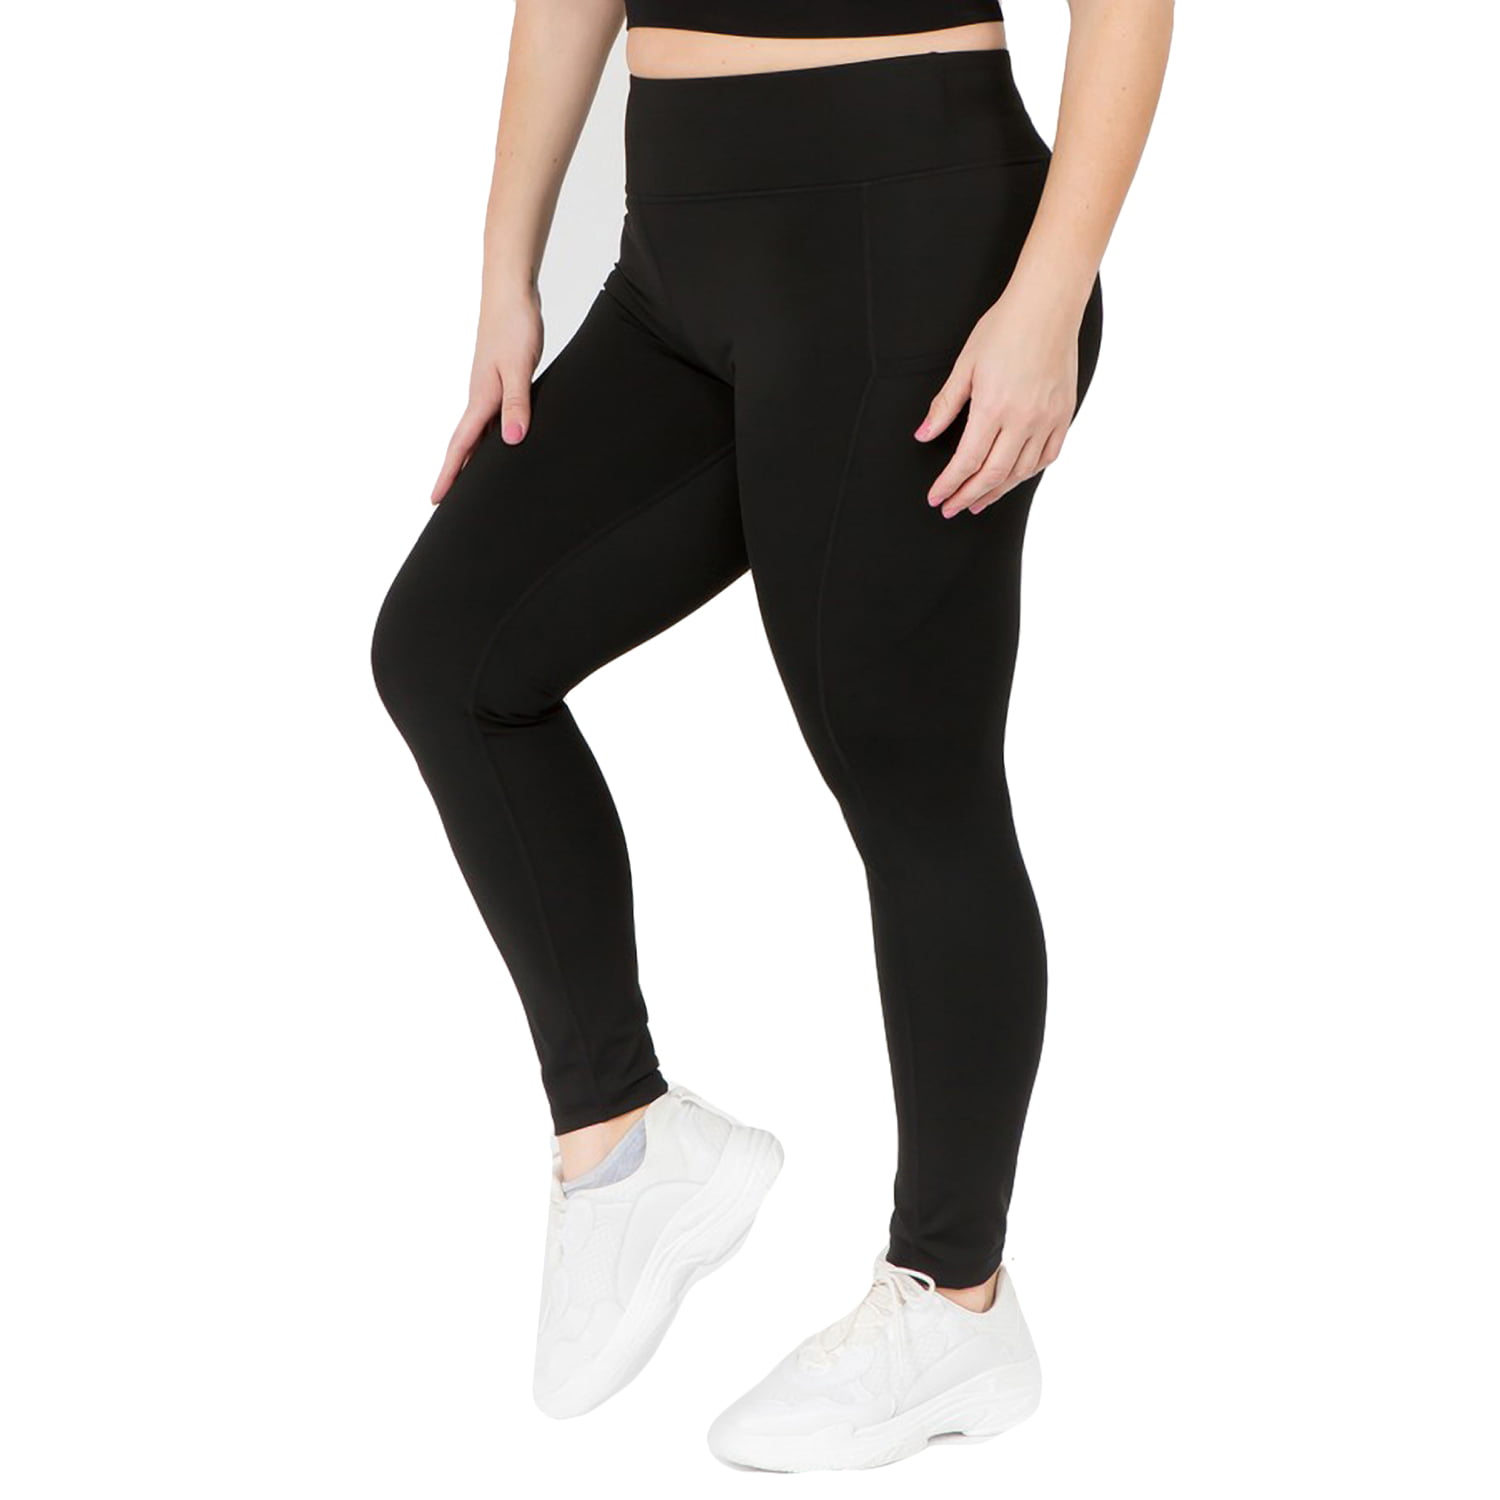 Steppe?Naked Feeling High Waisted Yoga Pants?Women's?Workout Capris Leggings  with Pockets?Tummy?Control?Buttery Soft?Running Compression Capris for  Athletic Gym Exercise Fitness Dark Grey-XL 